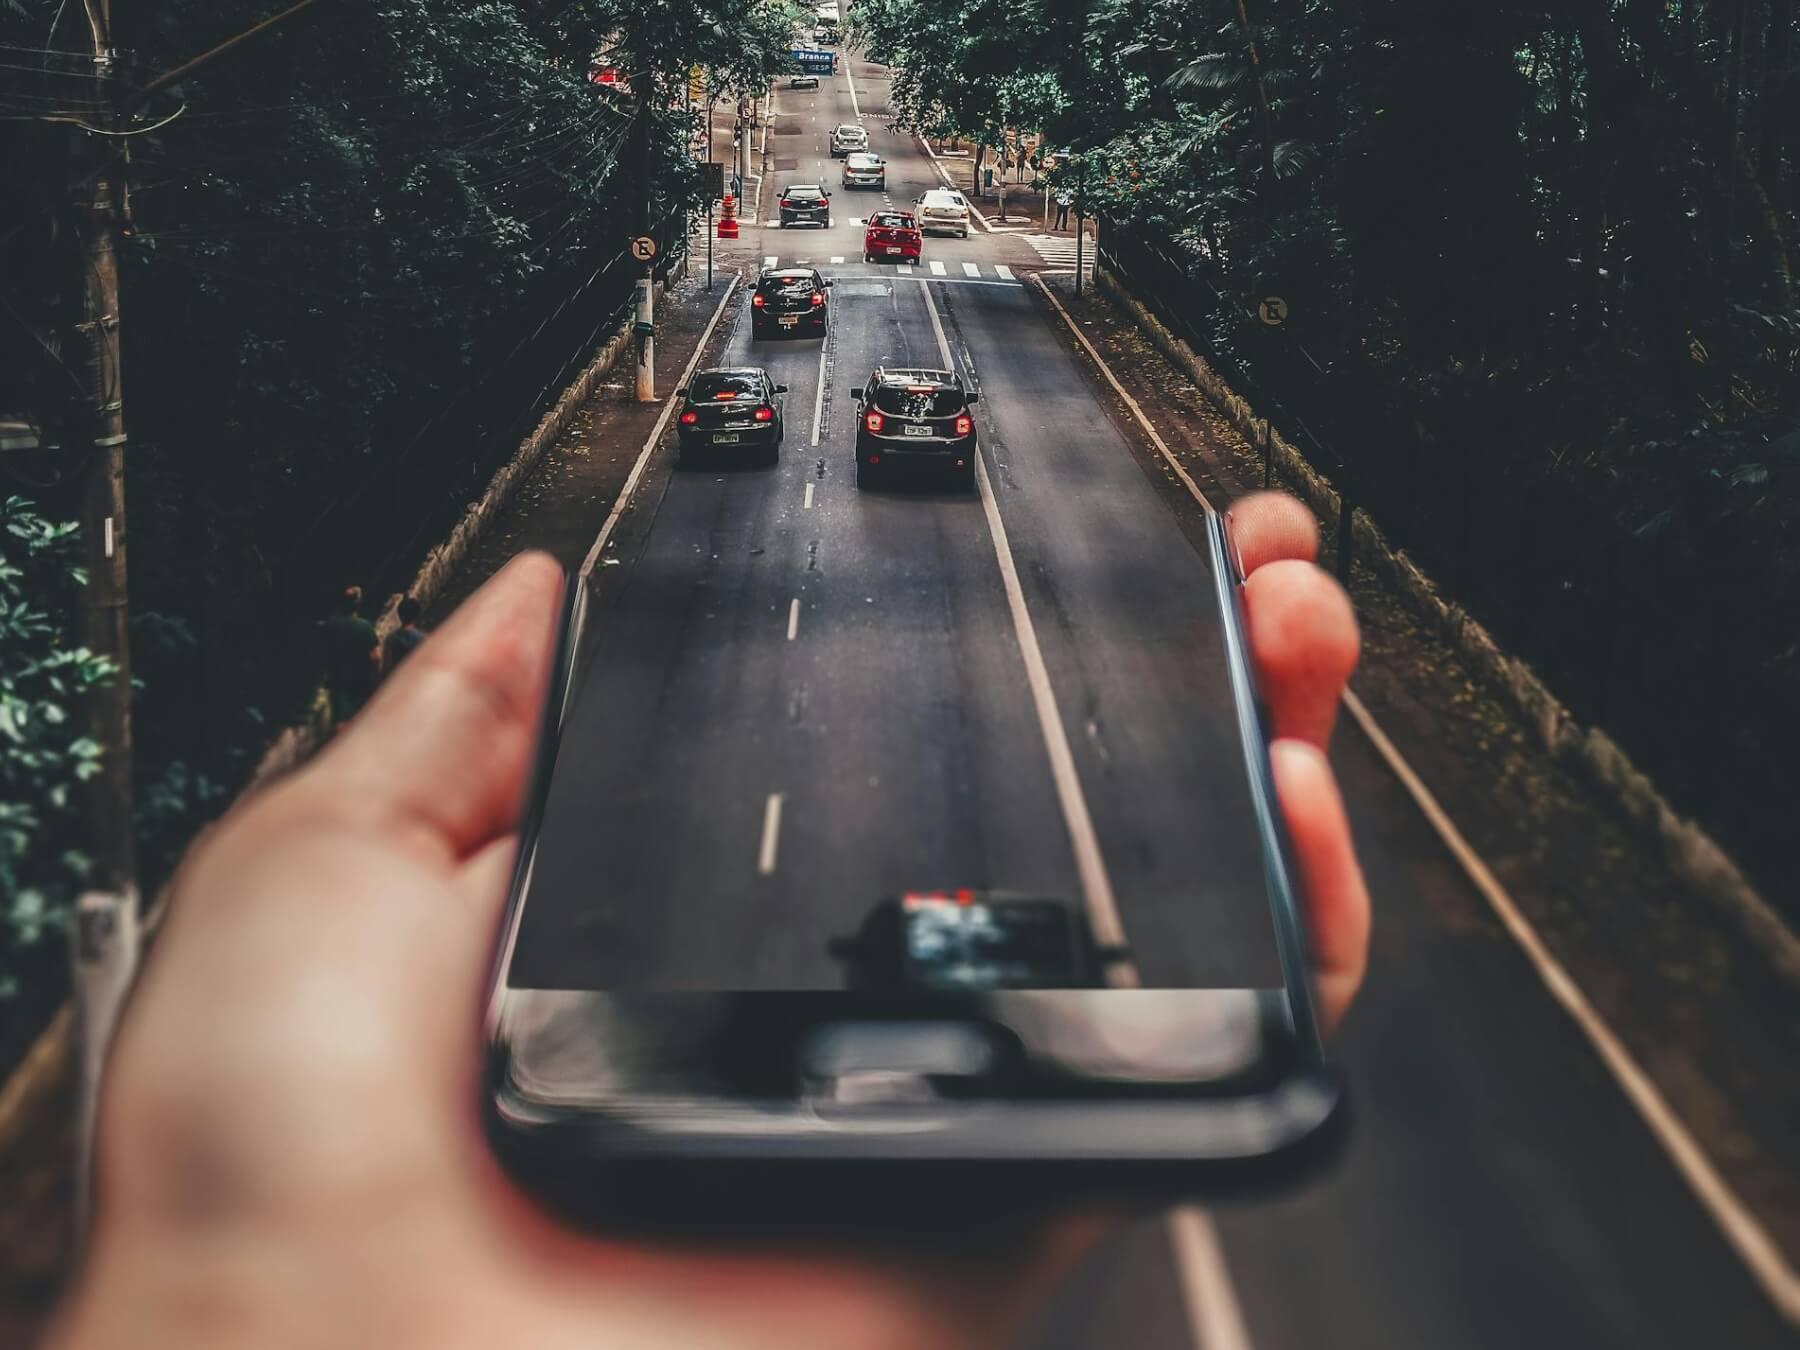 Digitally manipulated image of cars on road coming out of smartphone